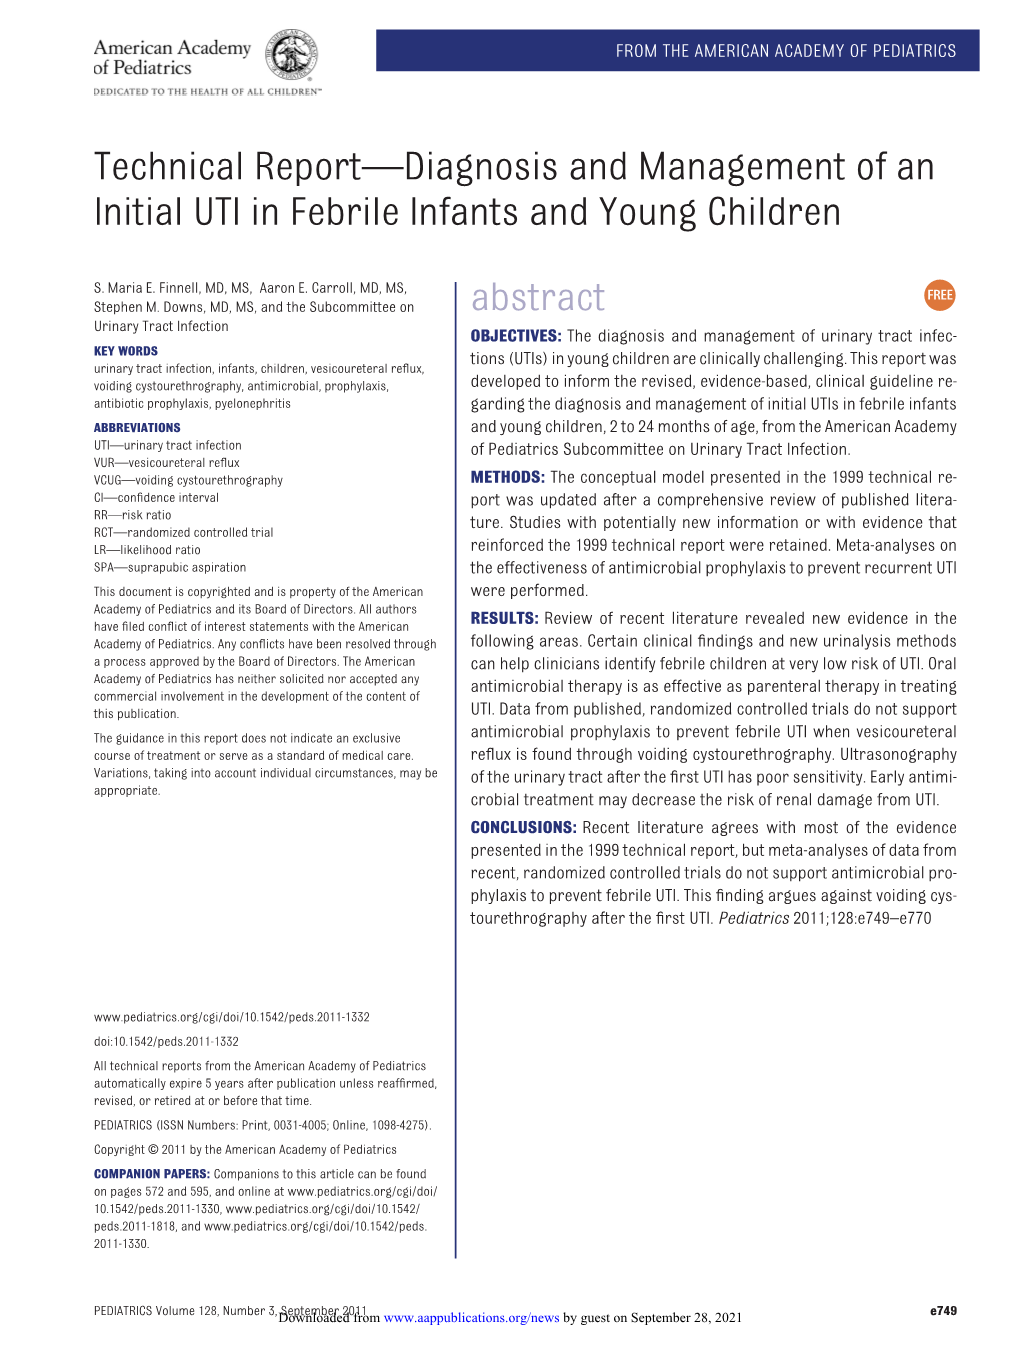 Technical Report—Diagnosis and Management of an Initial UTI in Febrile Infants and Young Children